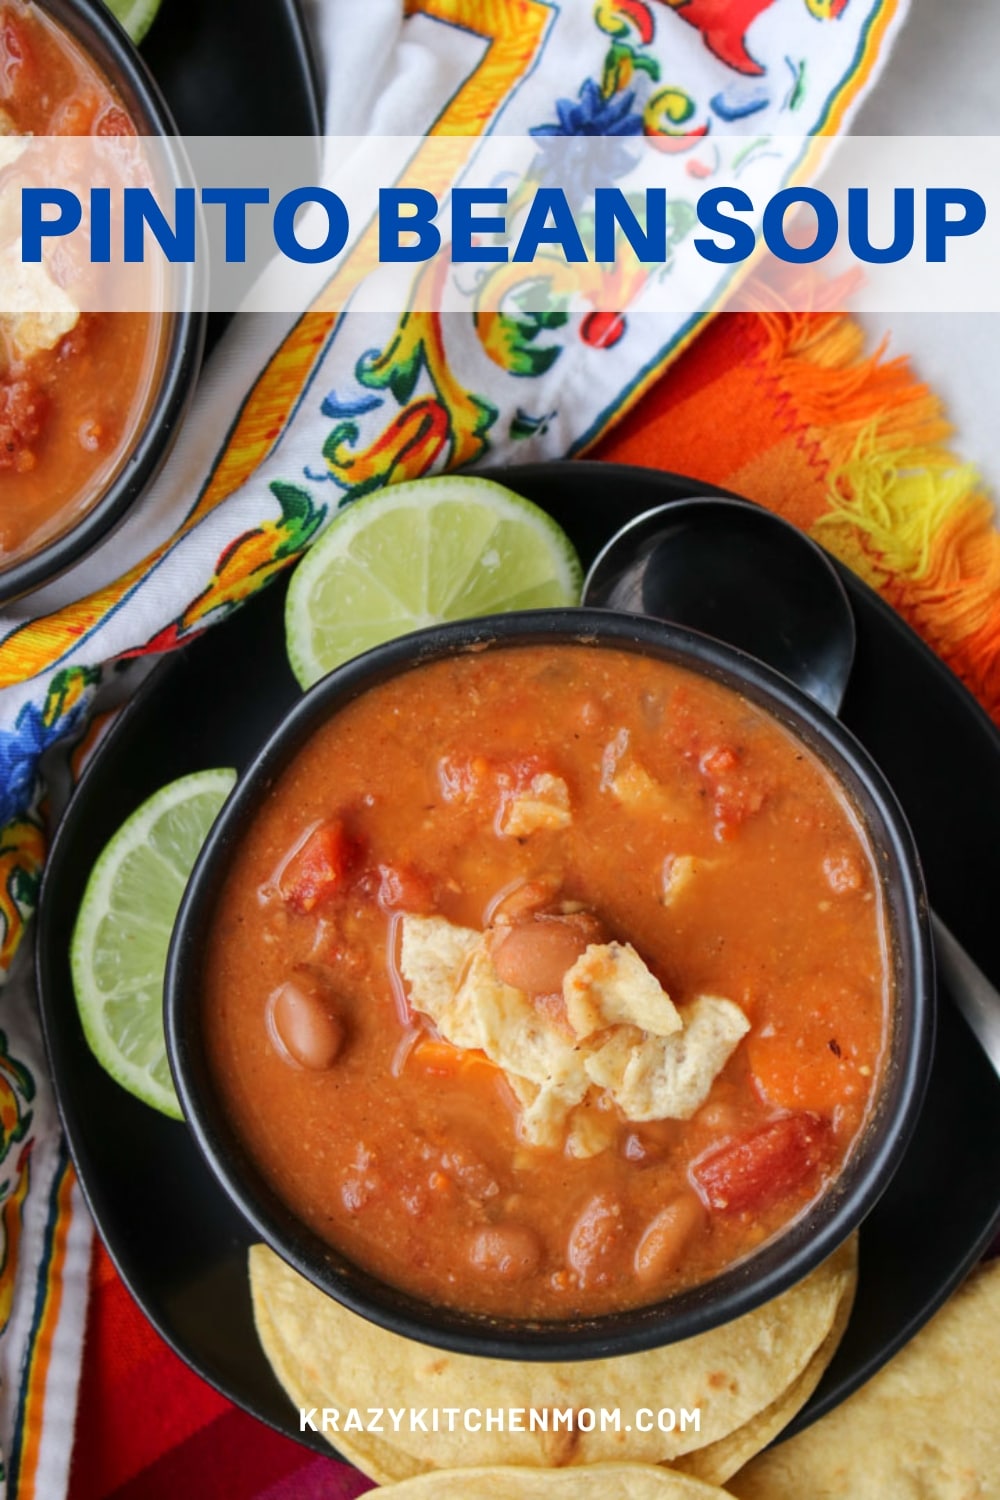 Get cozy with this Tex-Mex-inspired pinto bean soup with a little heat and warm seasonings. Easy and delicious. via @krazykitchenmom